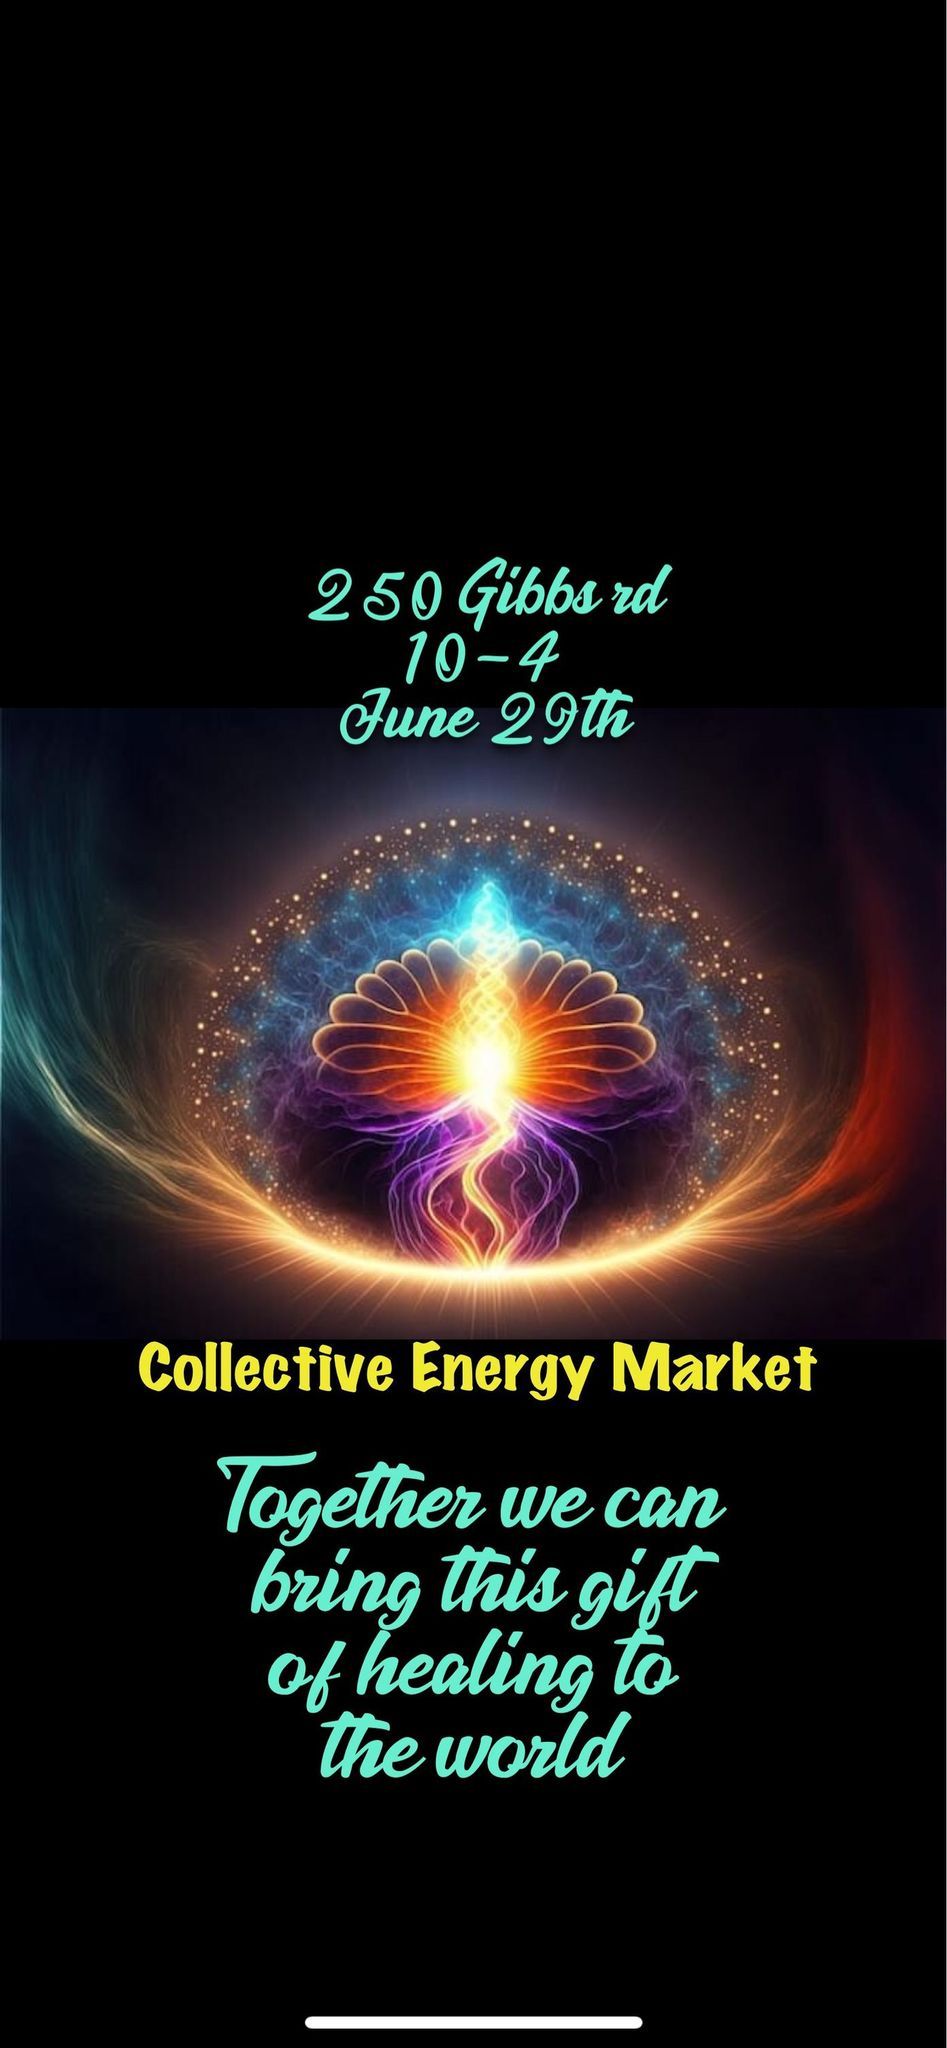 Second Event for Collective Energy Market 